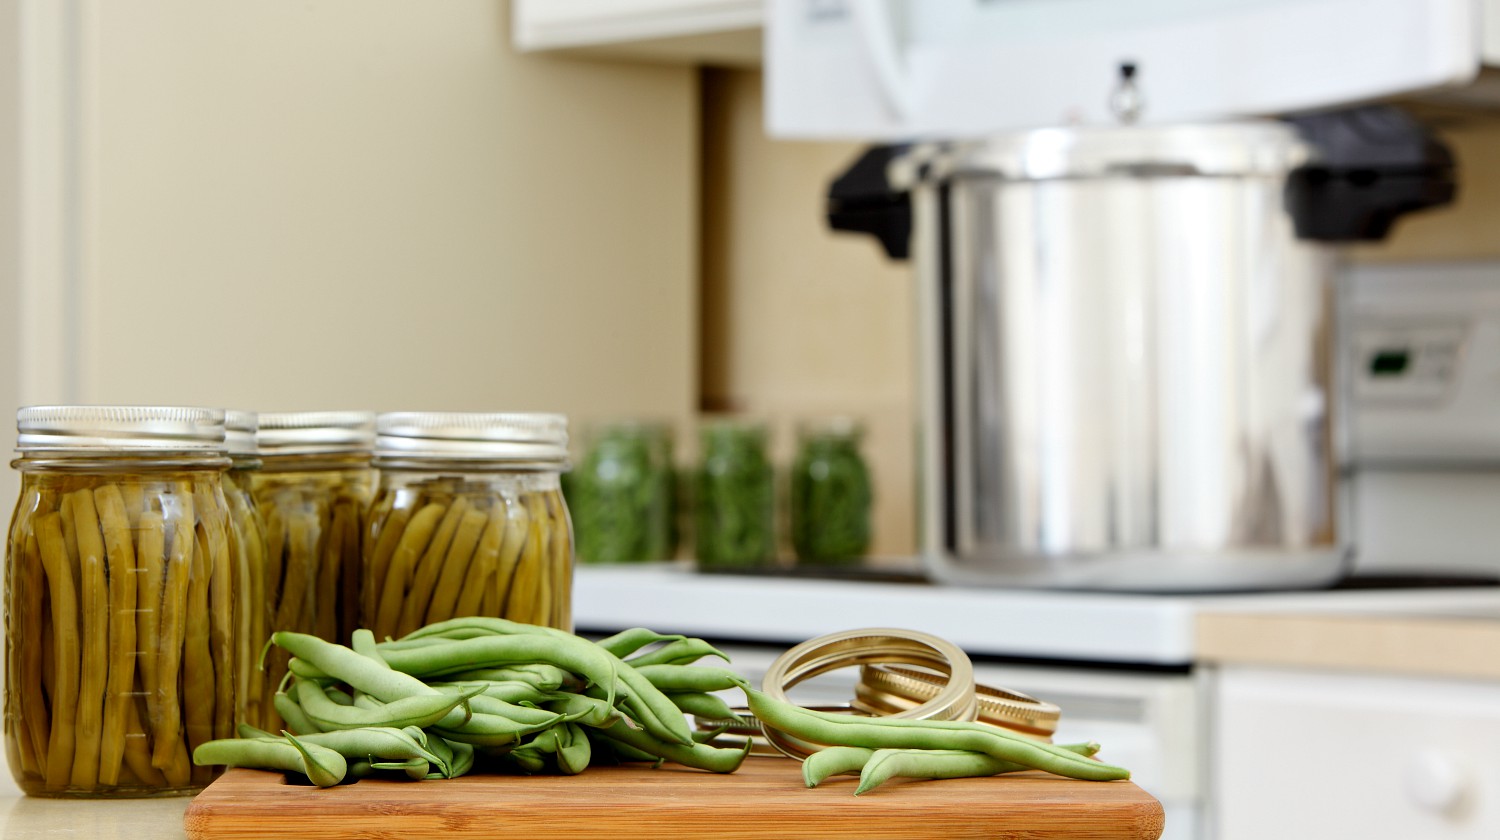 Feature | Canning process of green beans | Canning Jar | How To Guide To Canning